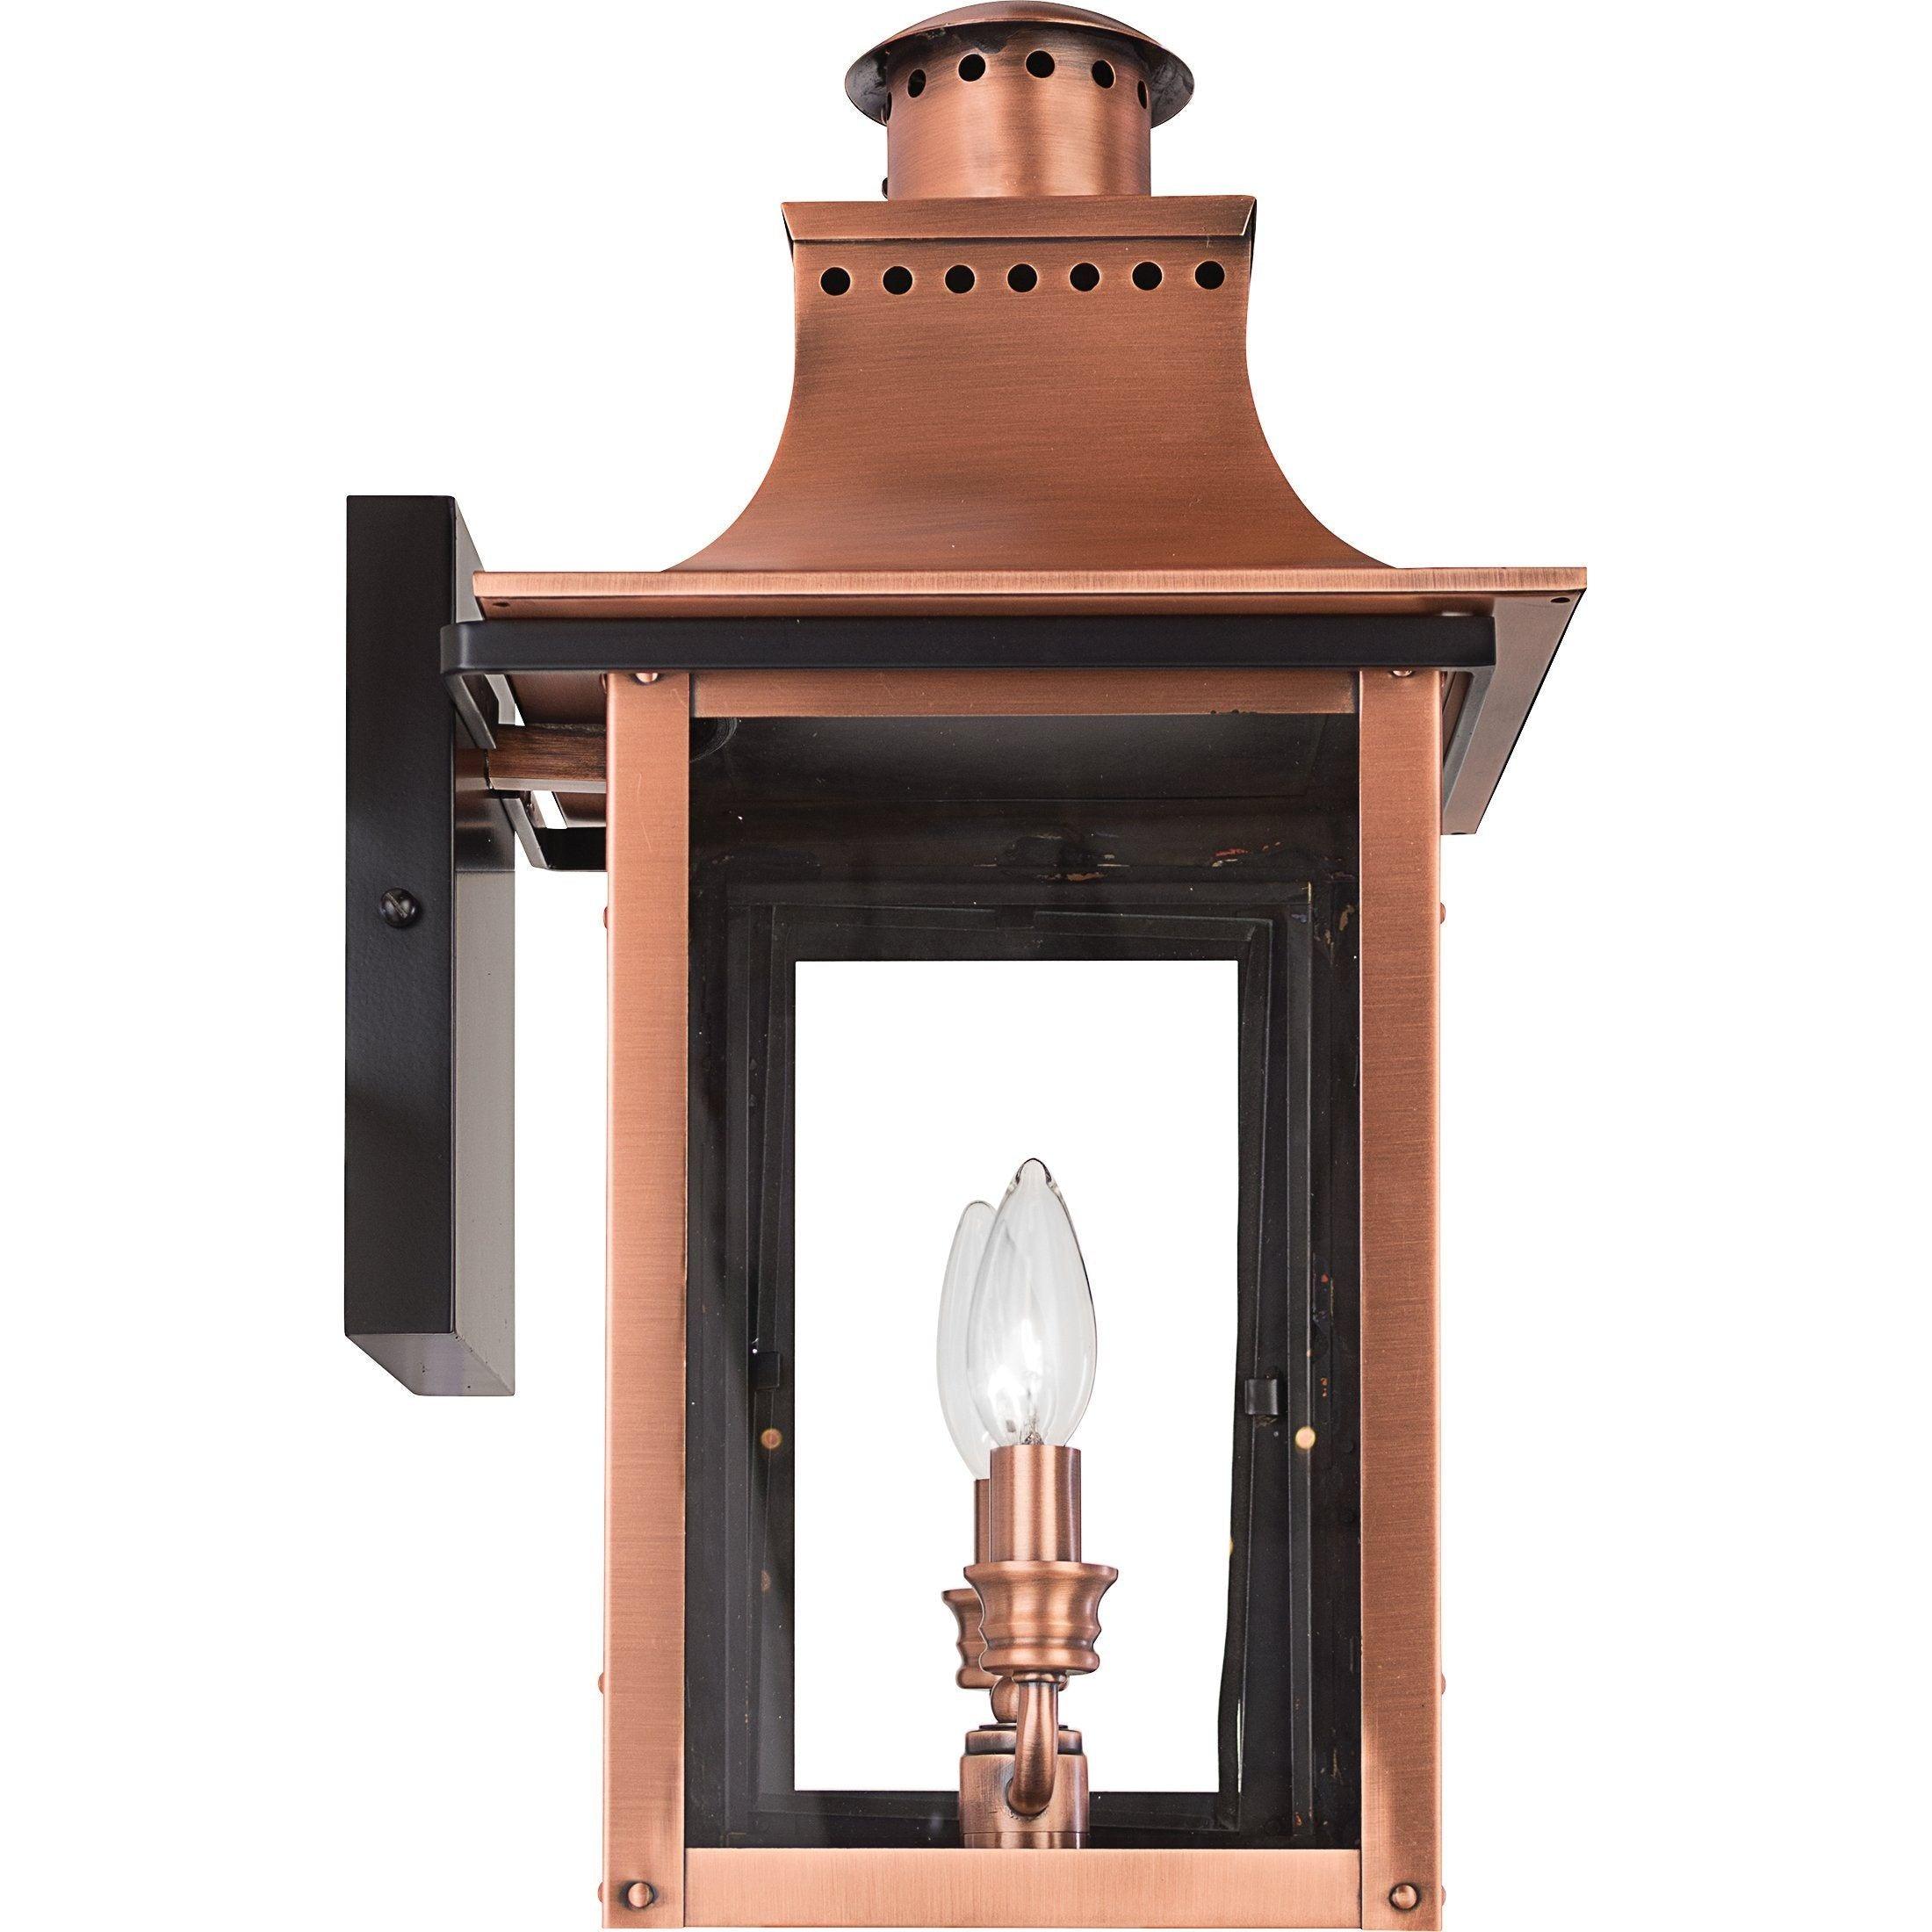 Quoizel - Chalmers Outdoor Wall Light - Lights Canada